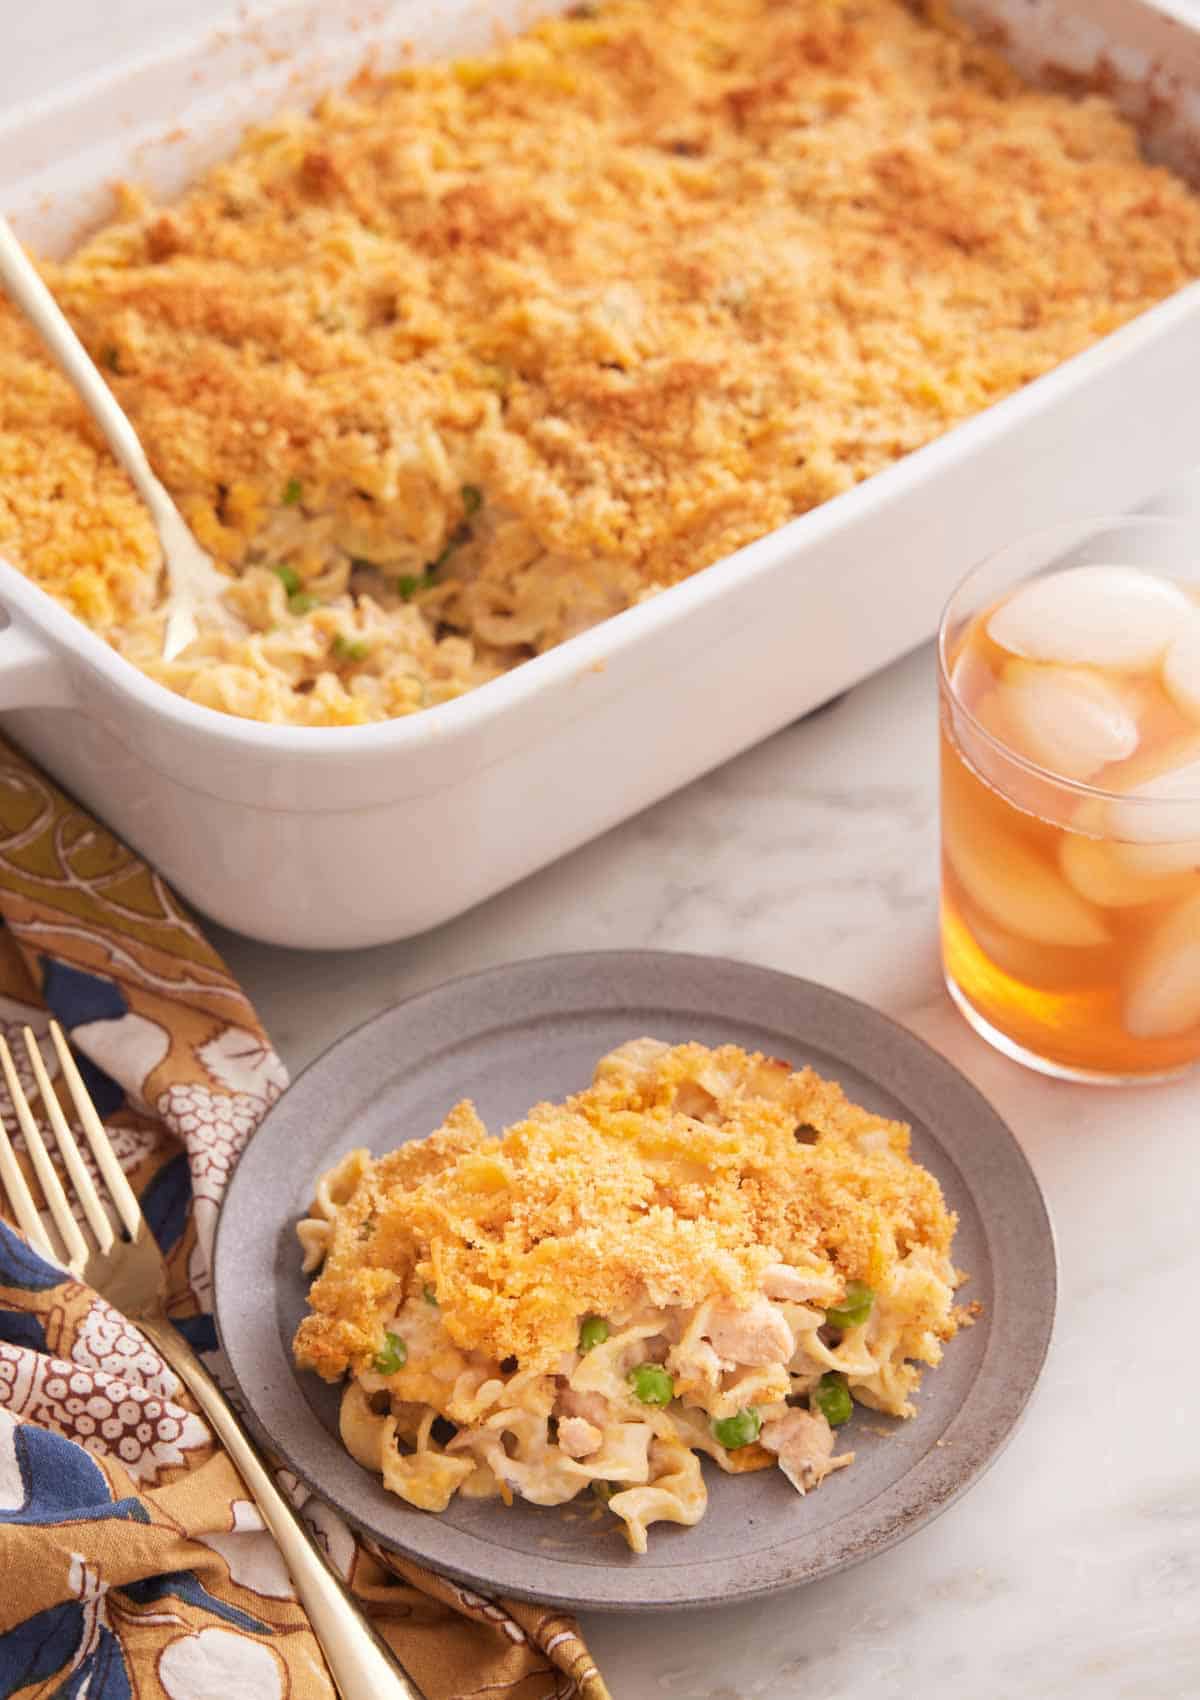 A plate with a serving of tuna casserole with a baking dish full in the back and an iced drink on the side.